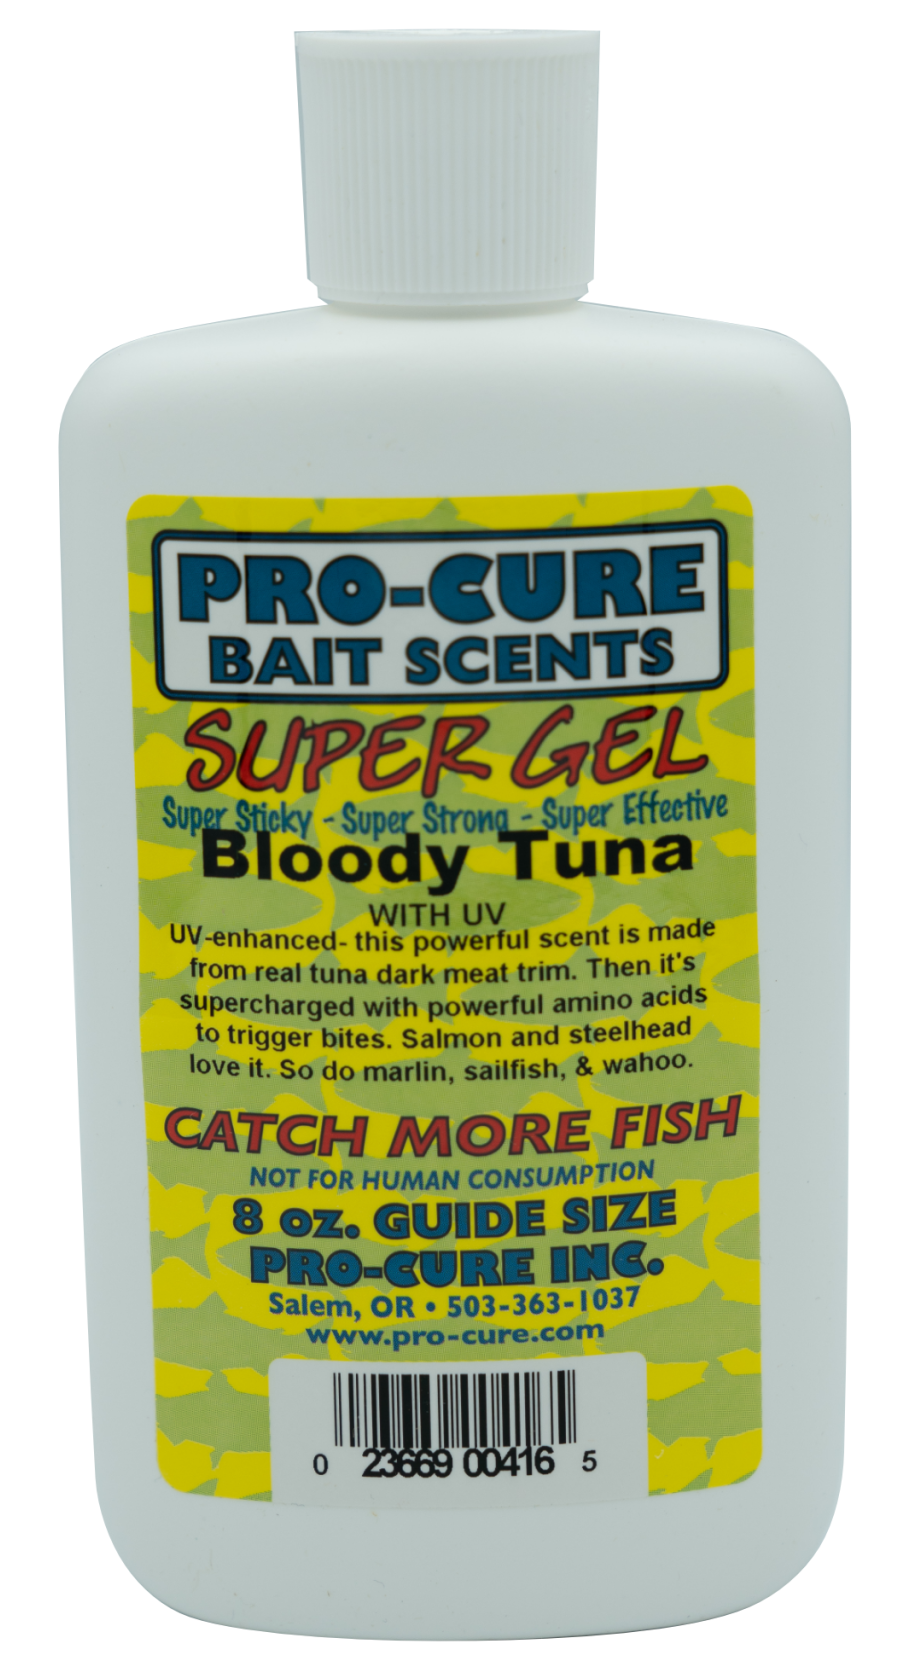 https://mcproductimages.s3-us-west-2.amazonaws.com/pro-cure/super-gel/8%20oz%20bloody%20tuna.png